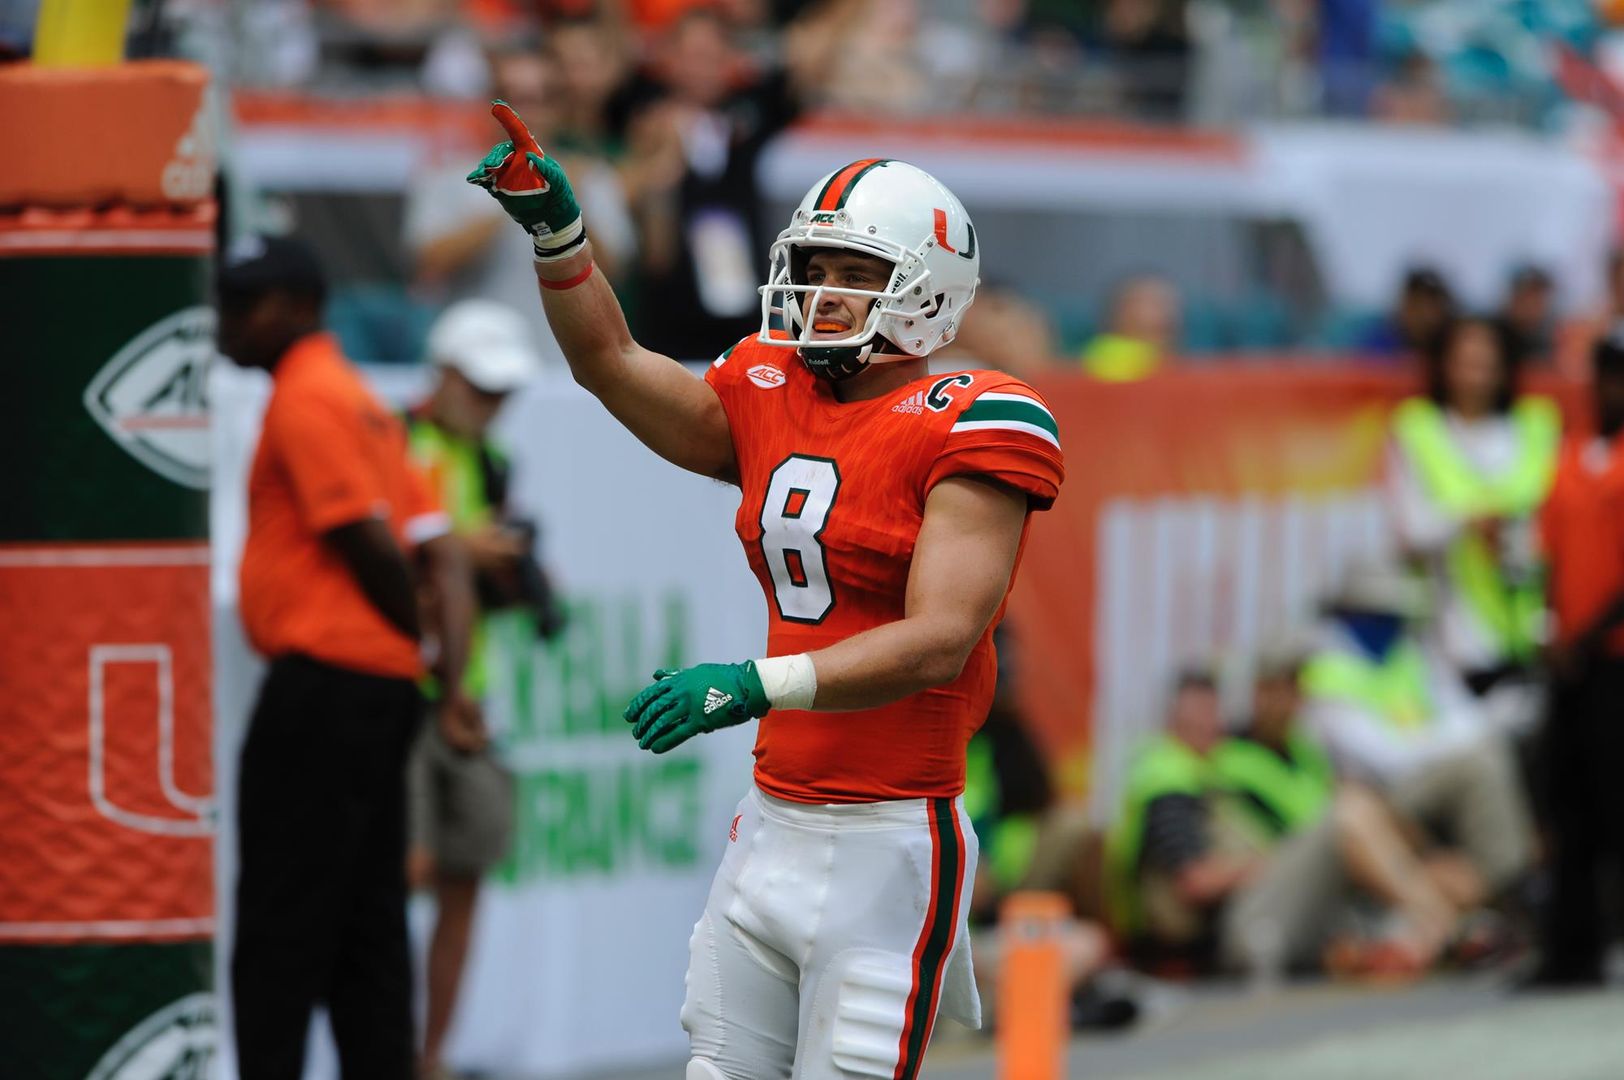 Canes Excited to Represent Miami on Saturday